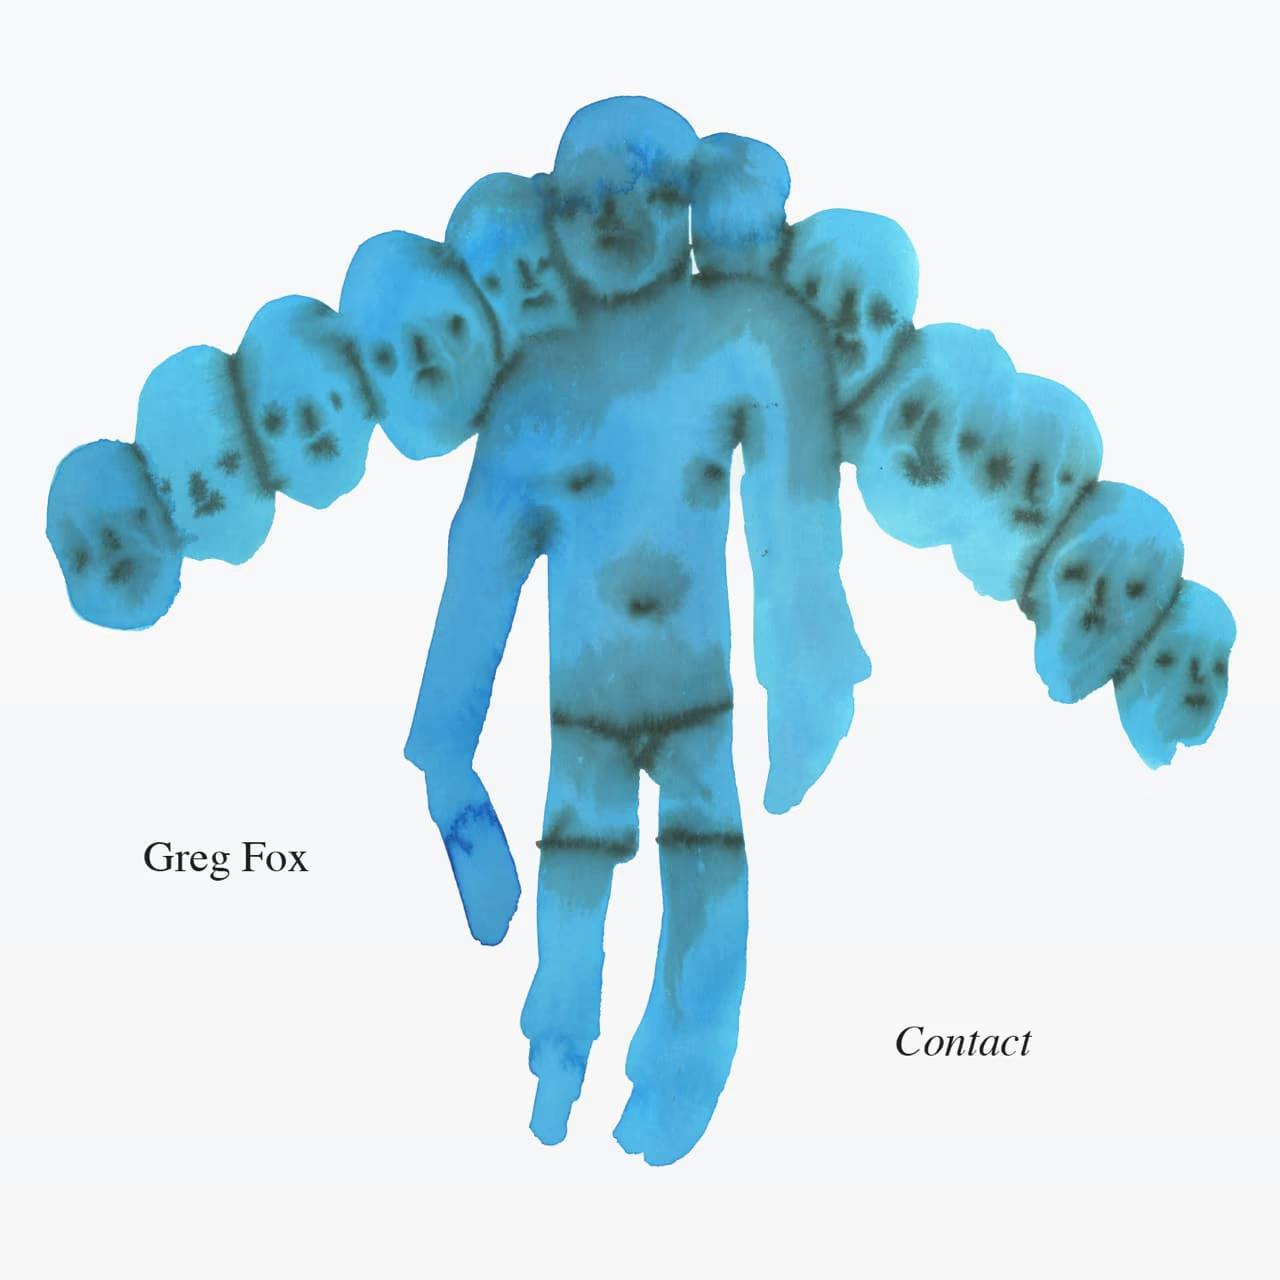 The album of Contact by Greg Fox